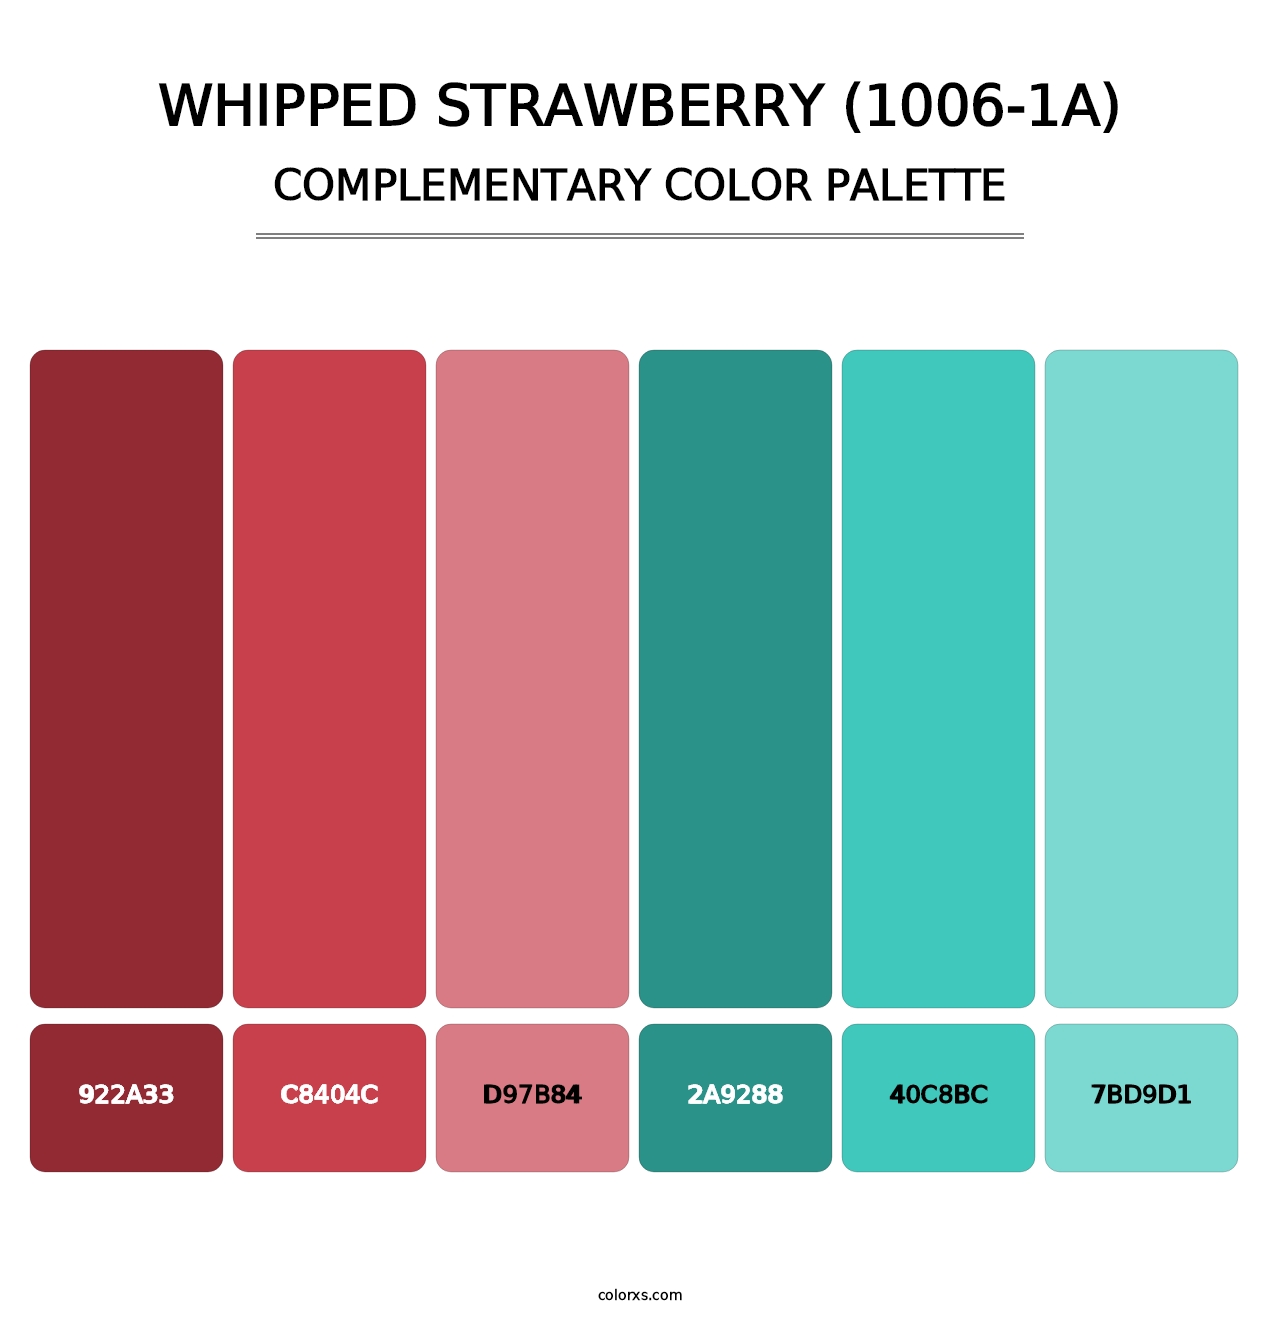 Whipped Strawberry (1006-1A) - Complementary Color Palette